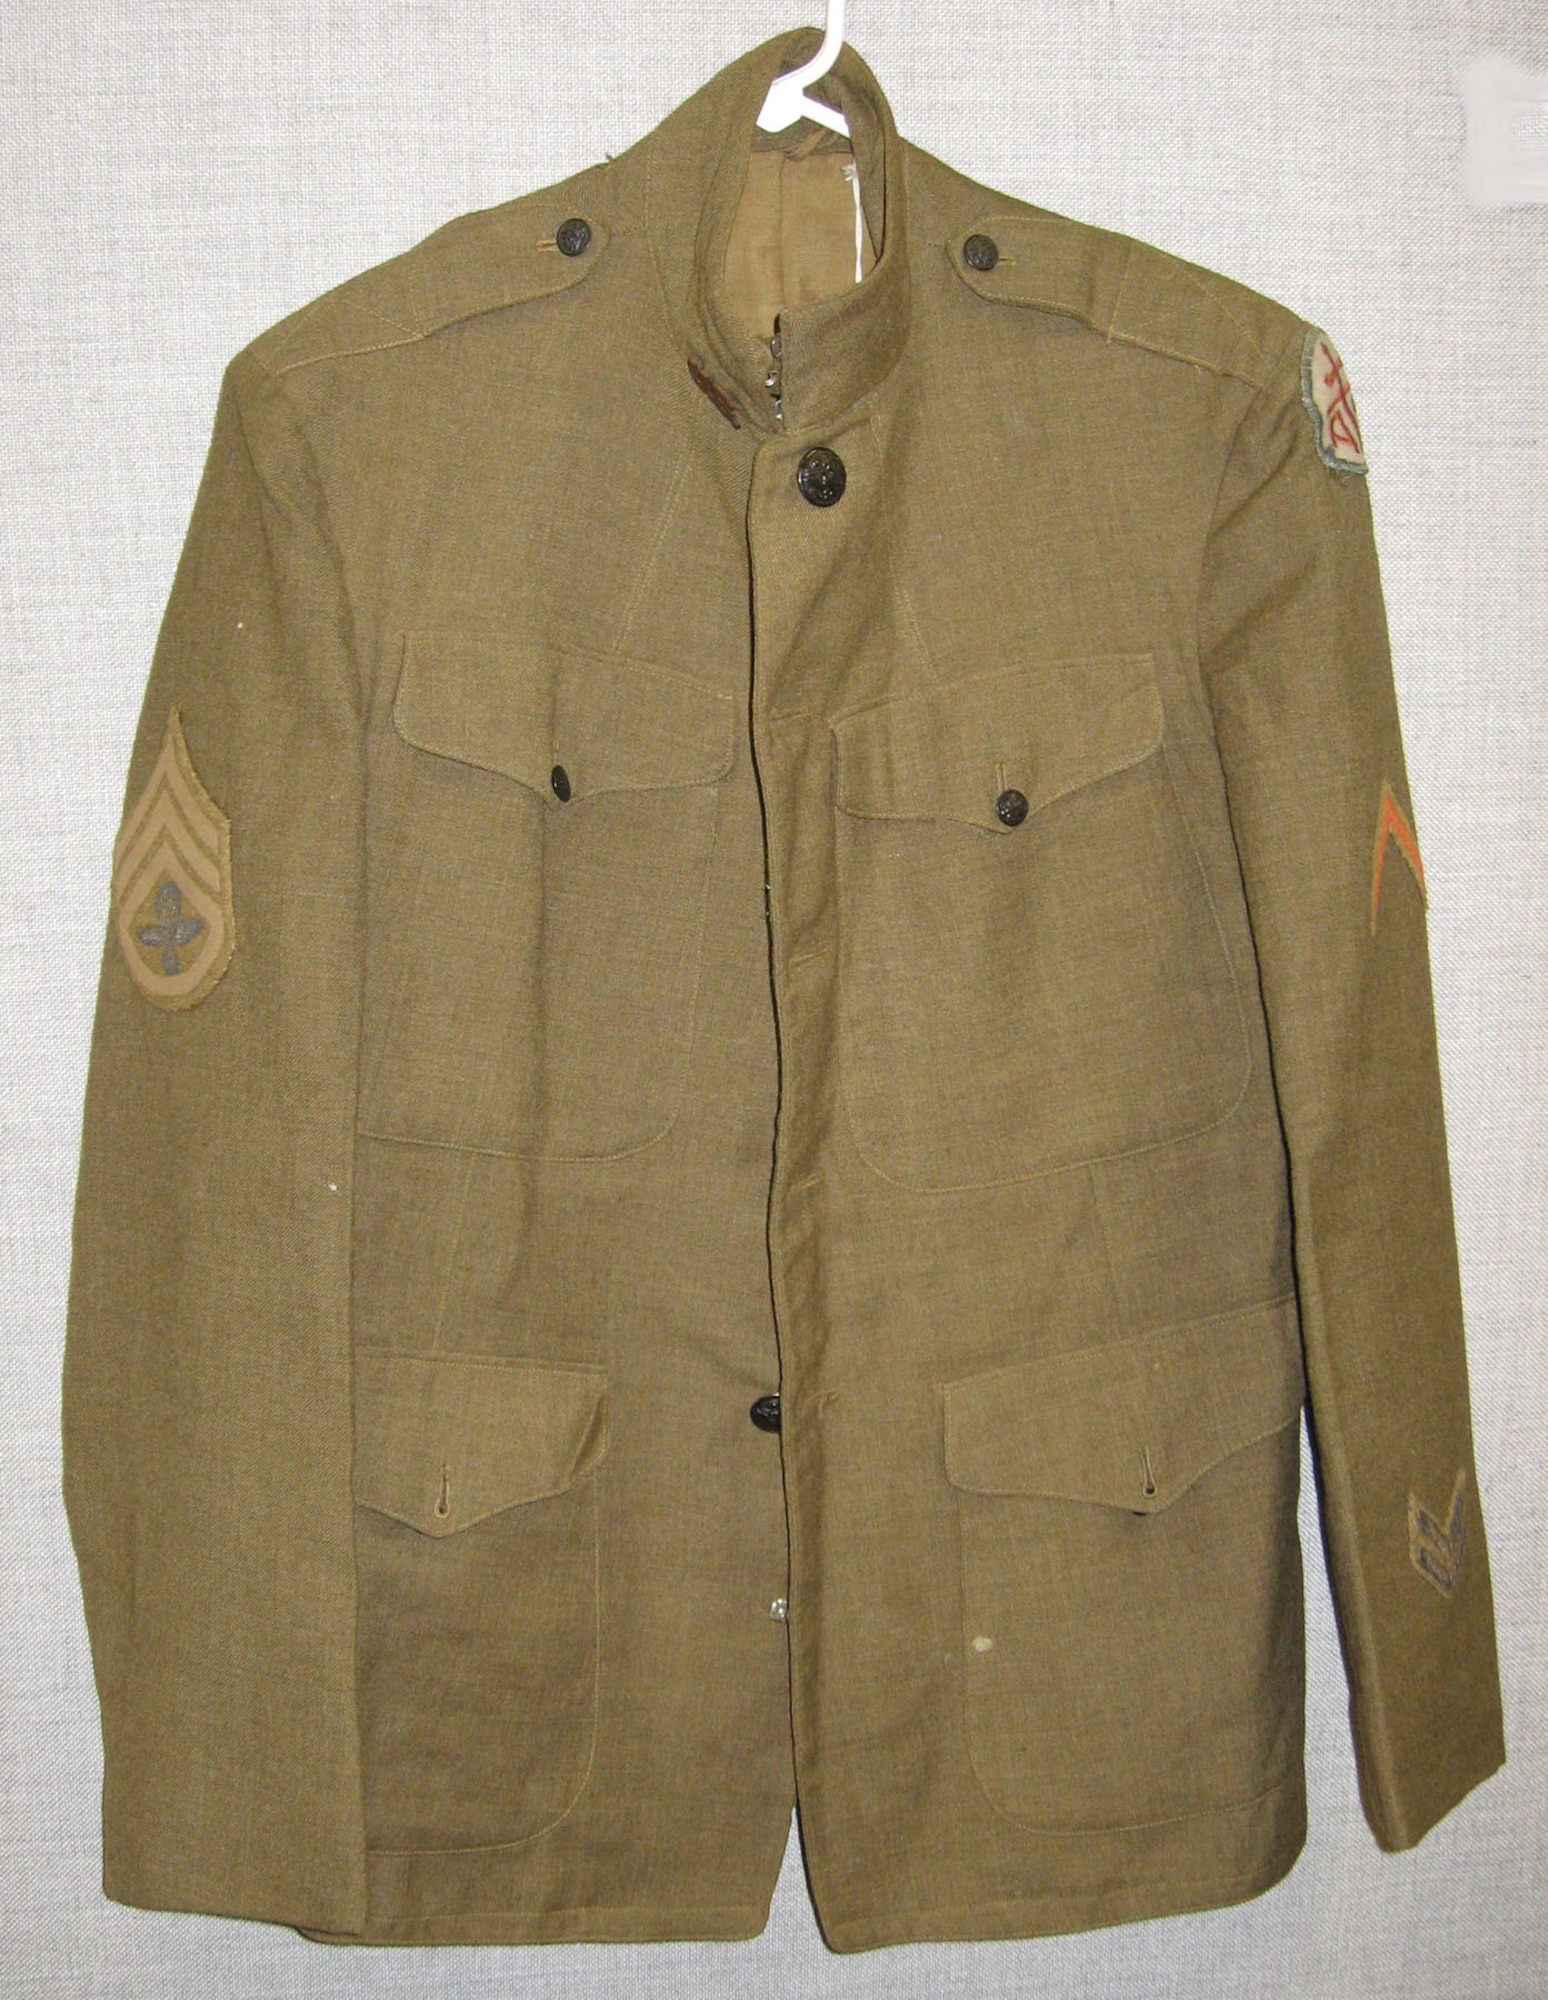 This service coat belonged to William Aulwes who served in World War I. Note the unique balloonist insignia embroidered on the rank chevron. (U.S. Air Force photo)